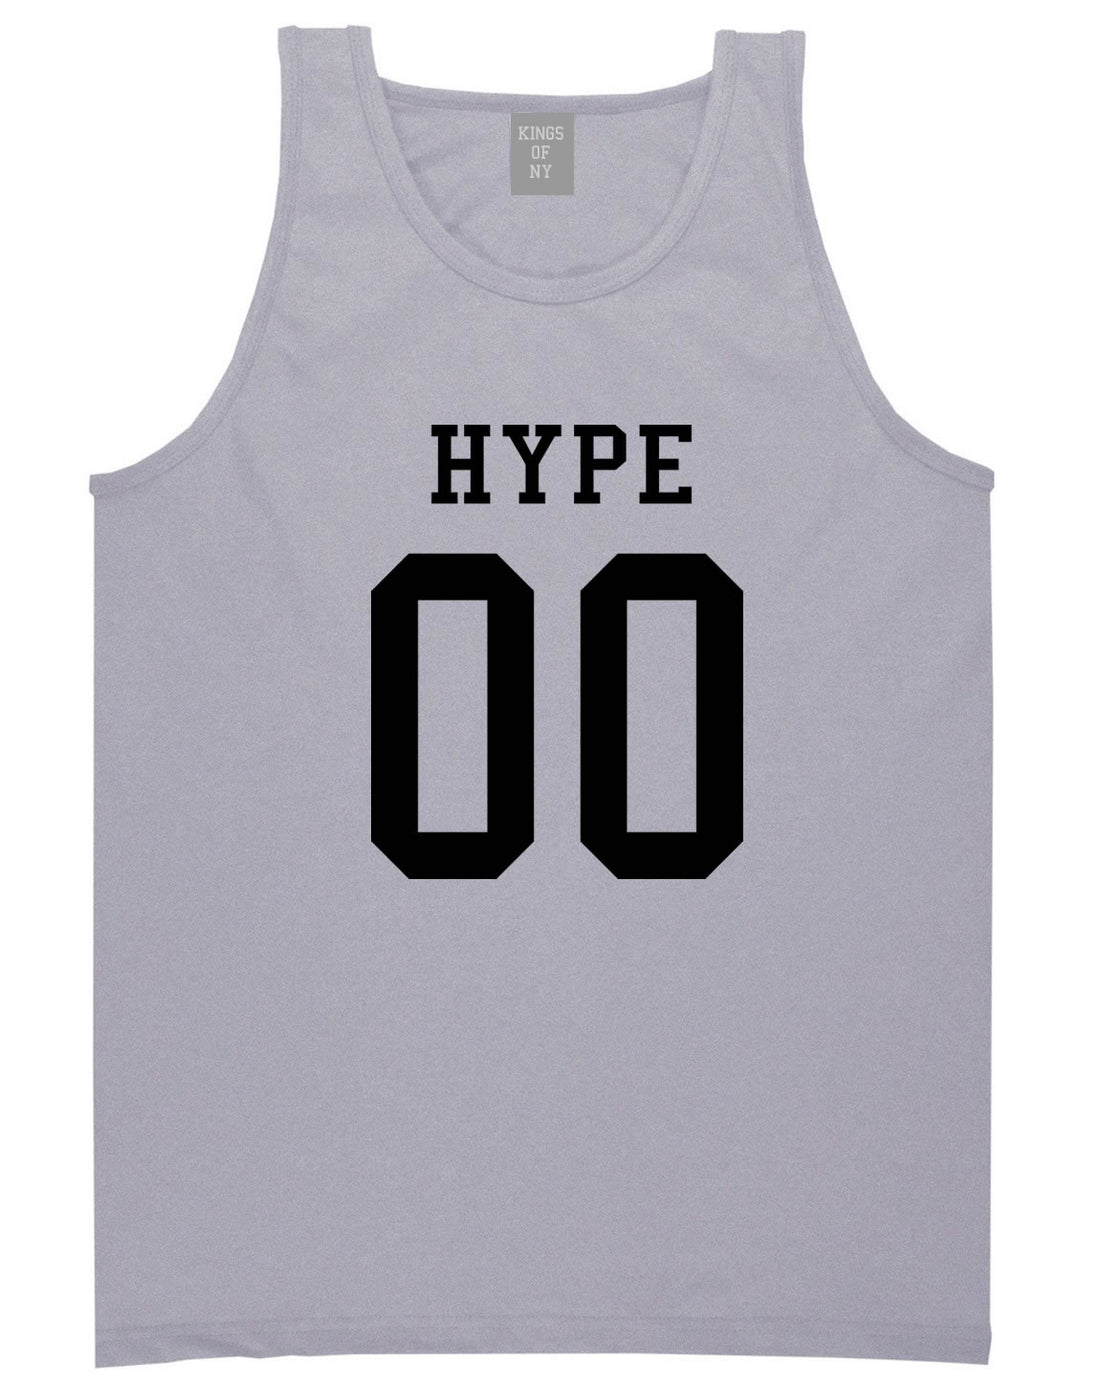 Hype Team Jersey Tank Top in Grey By Kings Of NY